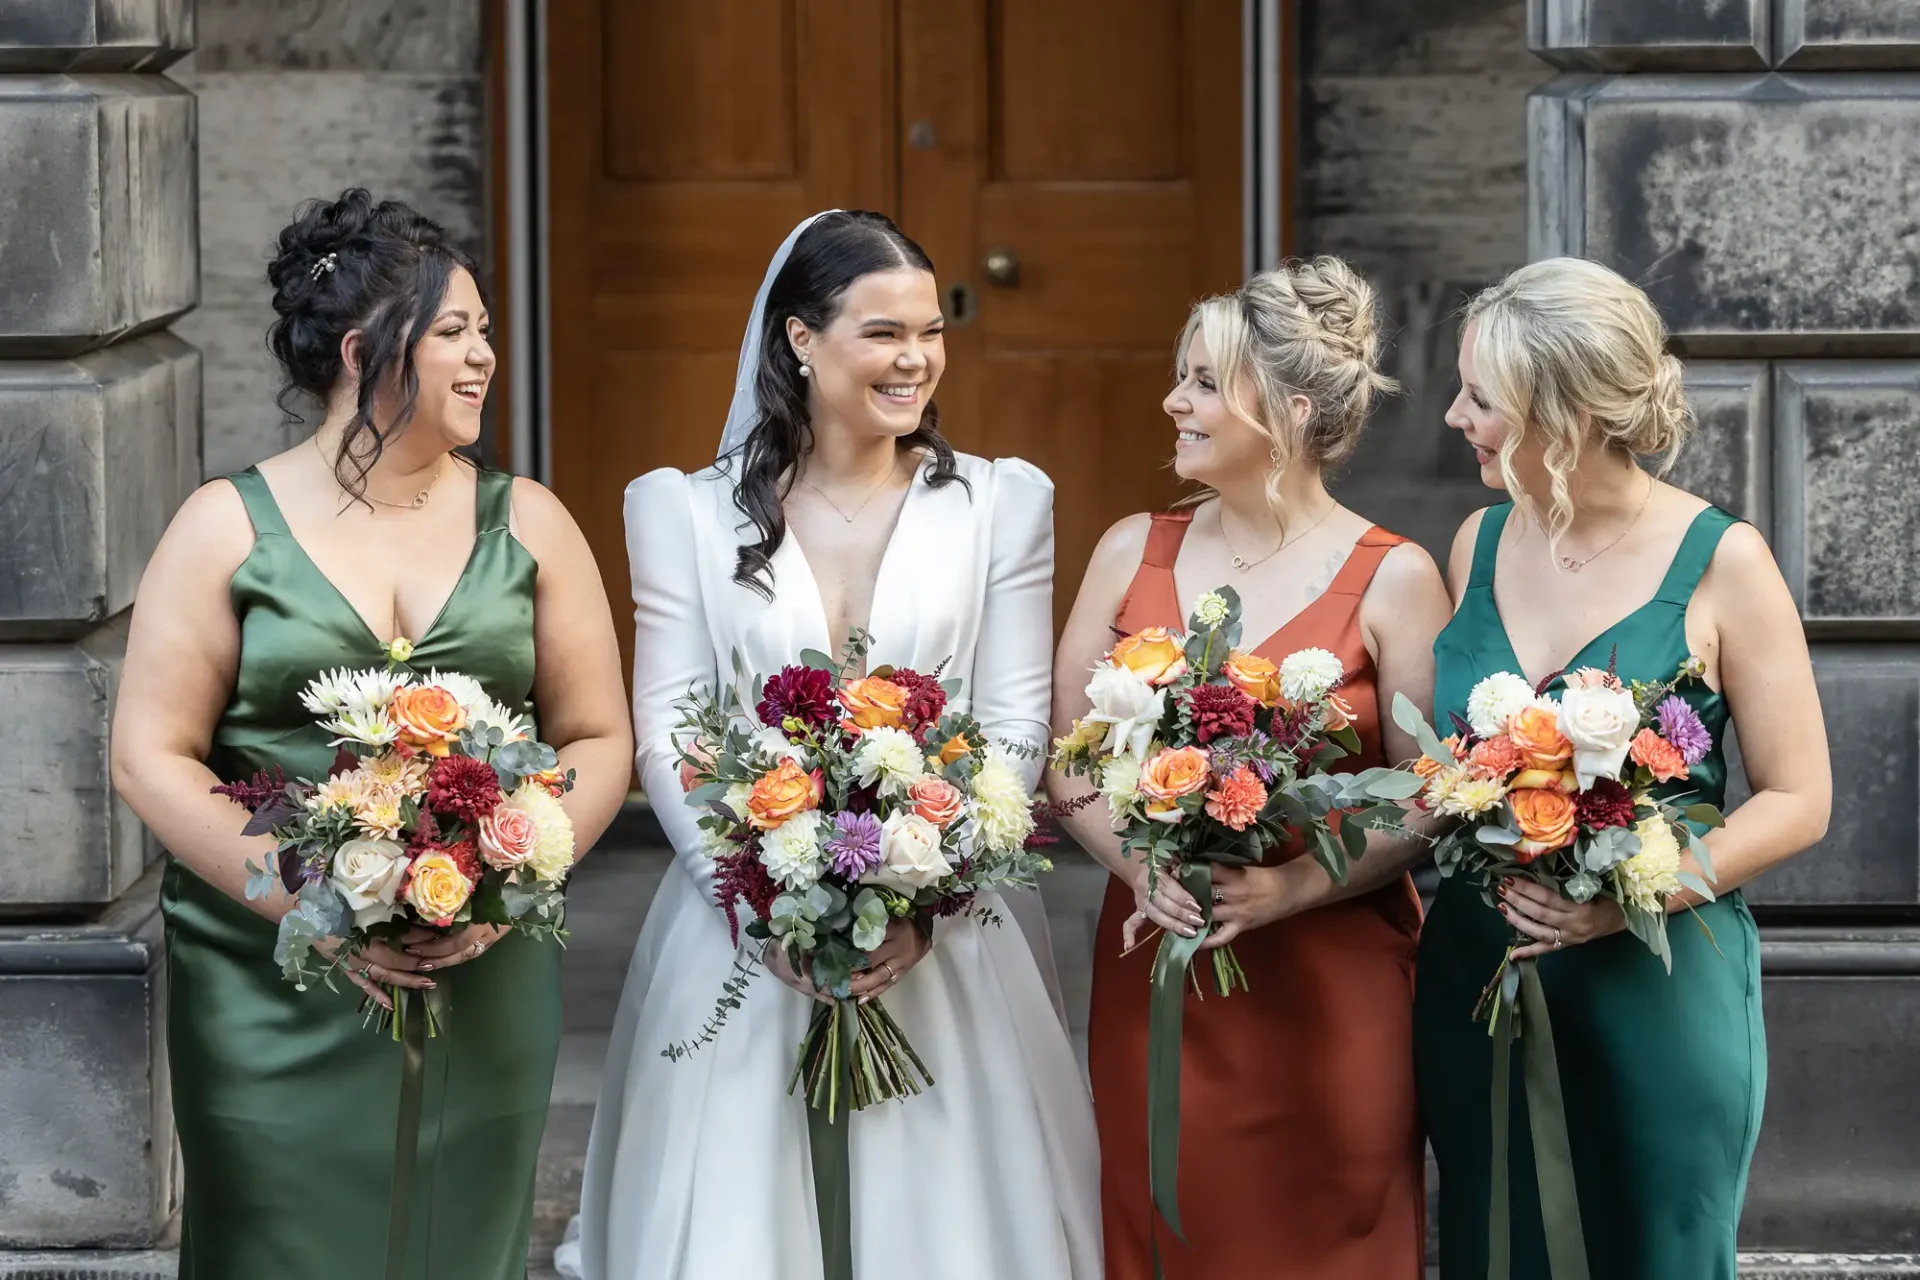 Bride in white dress smiling with three bridesmaids in green and teal dresses, holding colorful bouquets, standing outside a stone building.